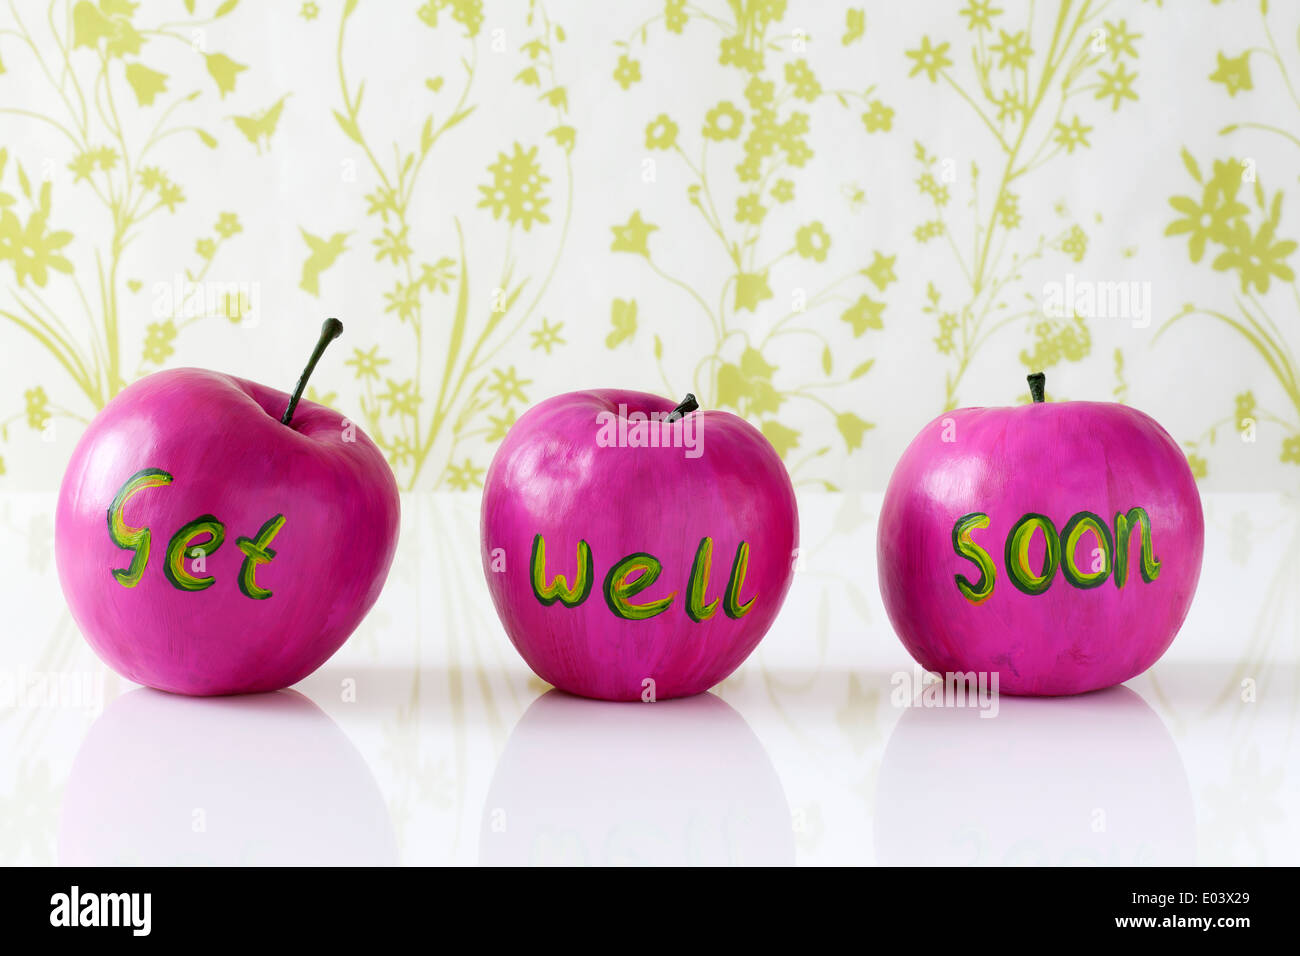 Get well soon card with hand painted pink apples Stock Photo